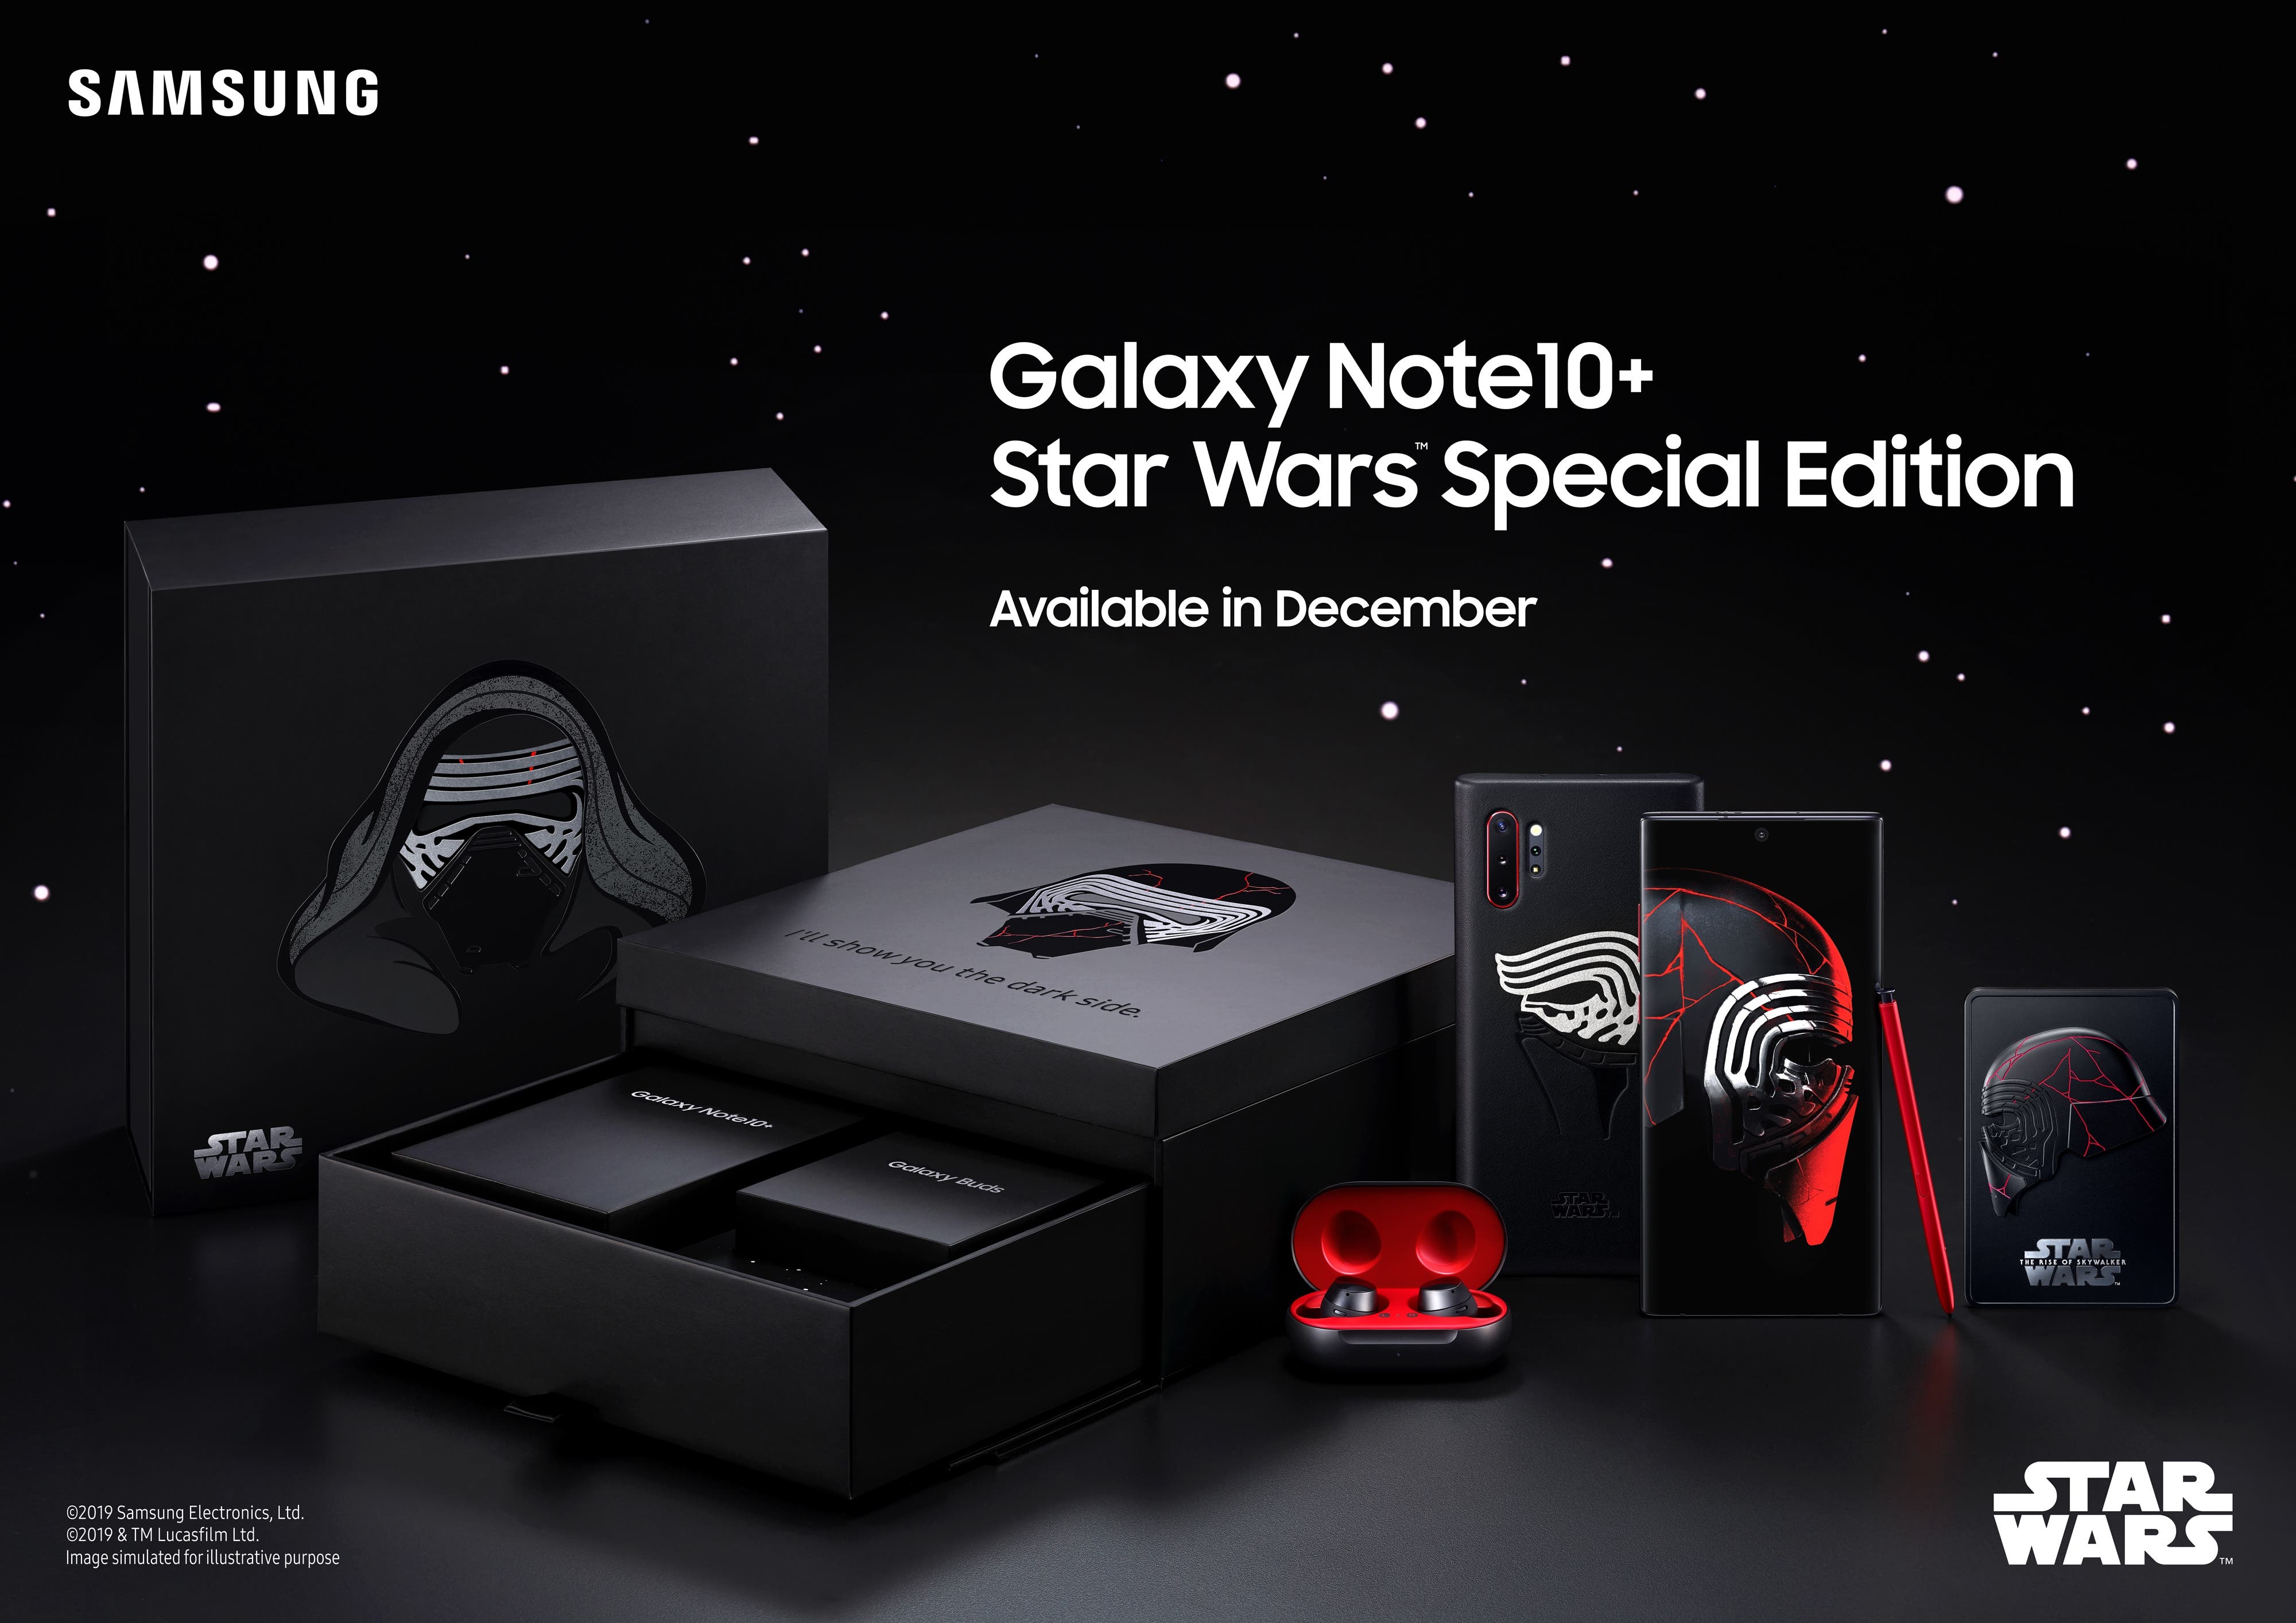 Samsung Galaxy Note 10+ Star Wars Special Edition Announced